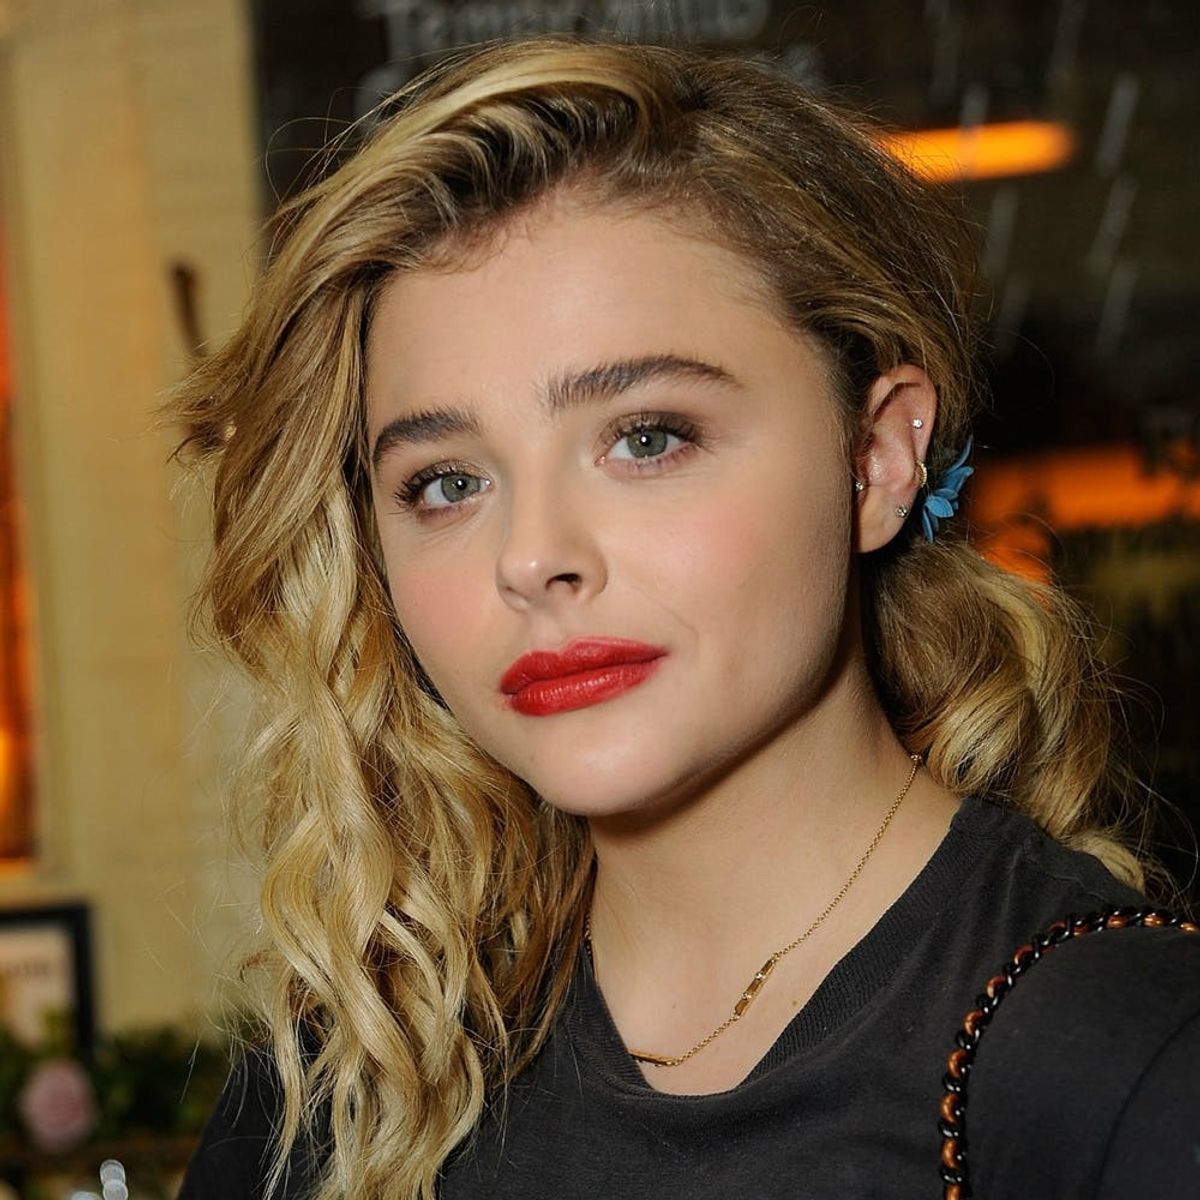 Here’s Why Everyone’s Freaking Out About Chloe Grace Moretz’s Teen Vogue Cover